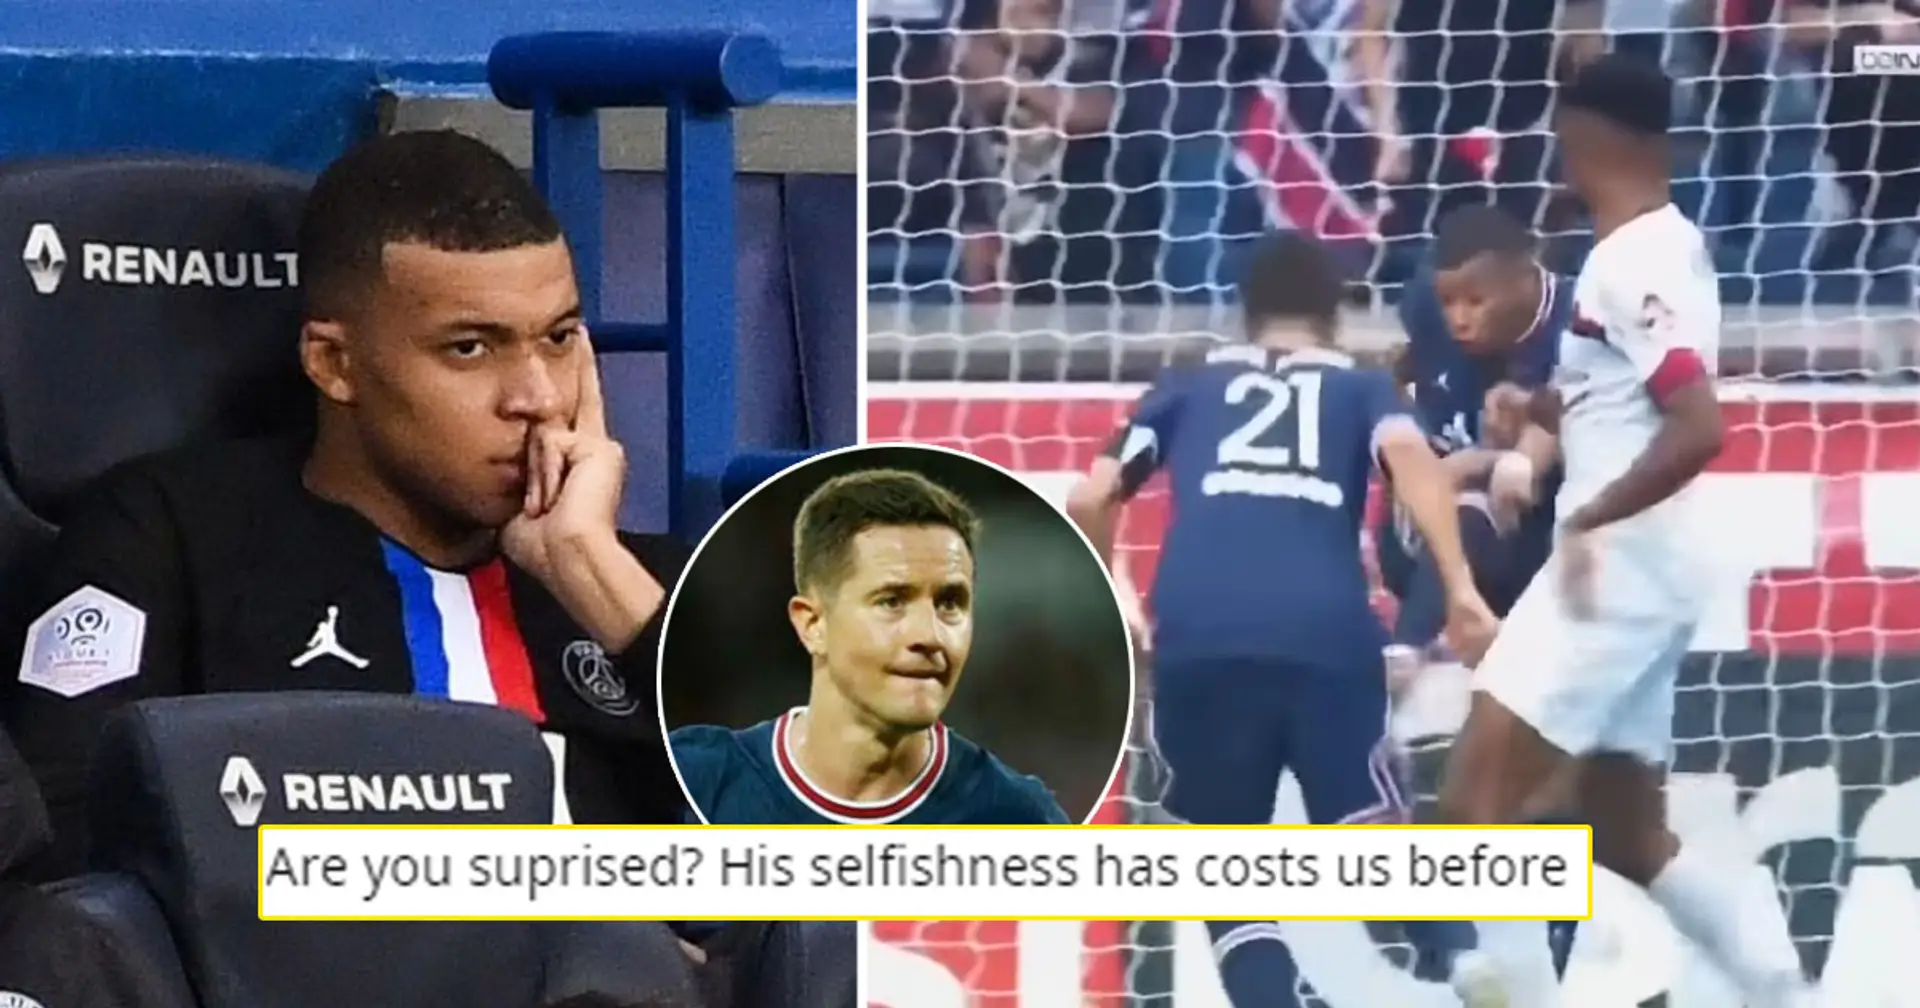 'Get his selfish *ss out of here': fans react as Mbappe accused of trying to steal away Herrera's goal